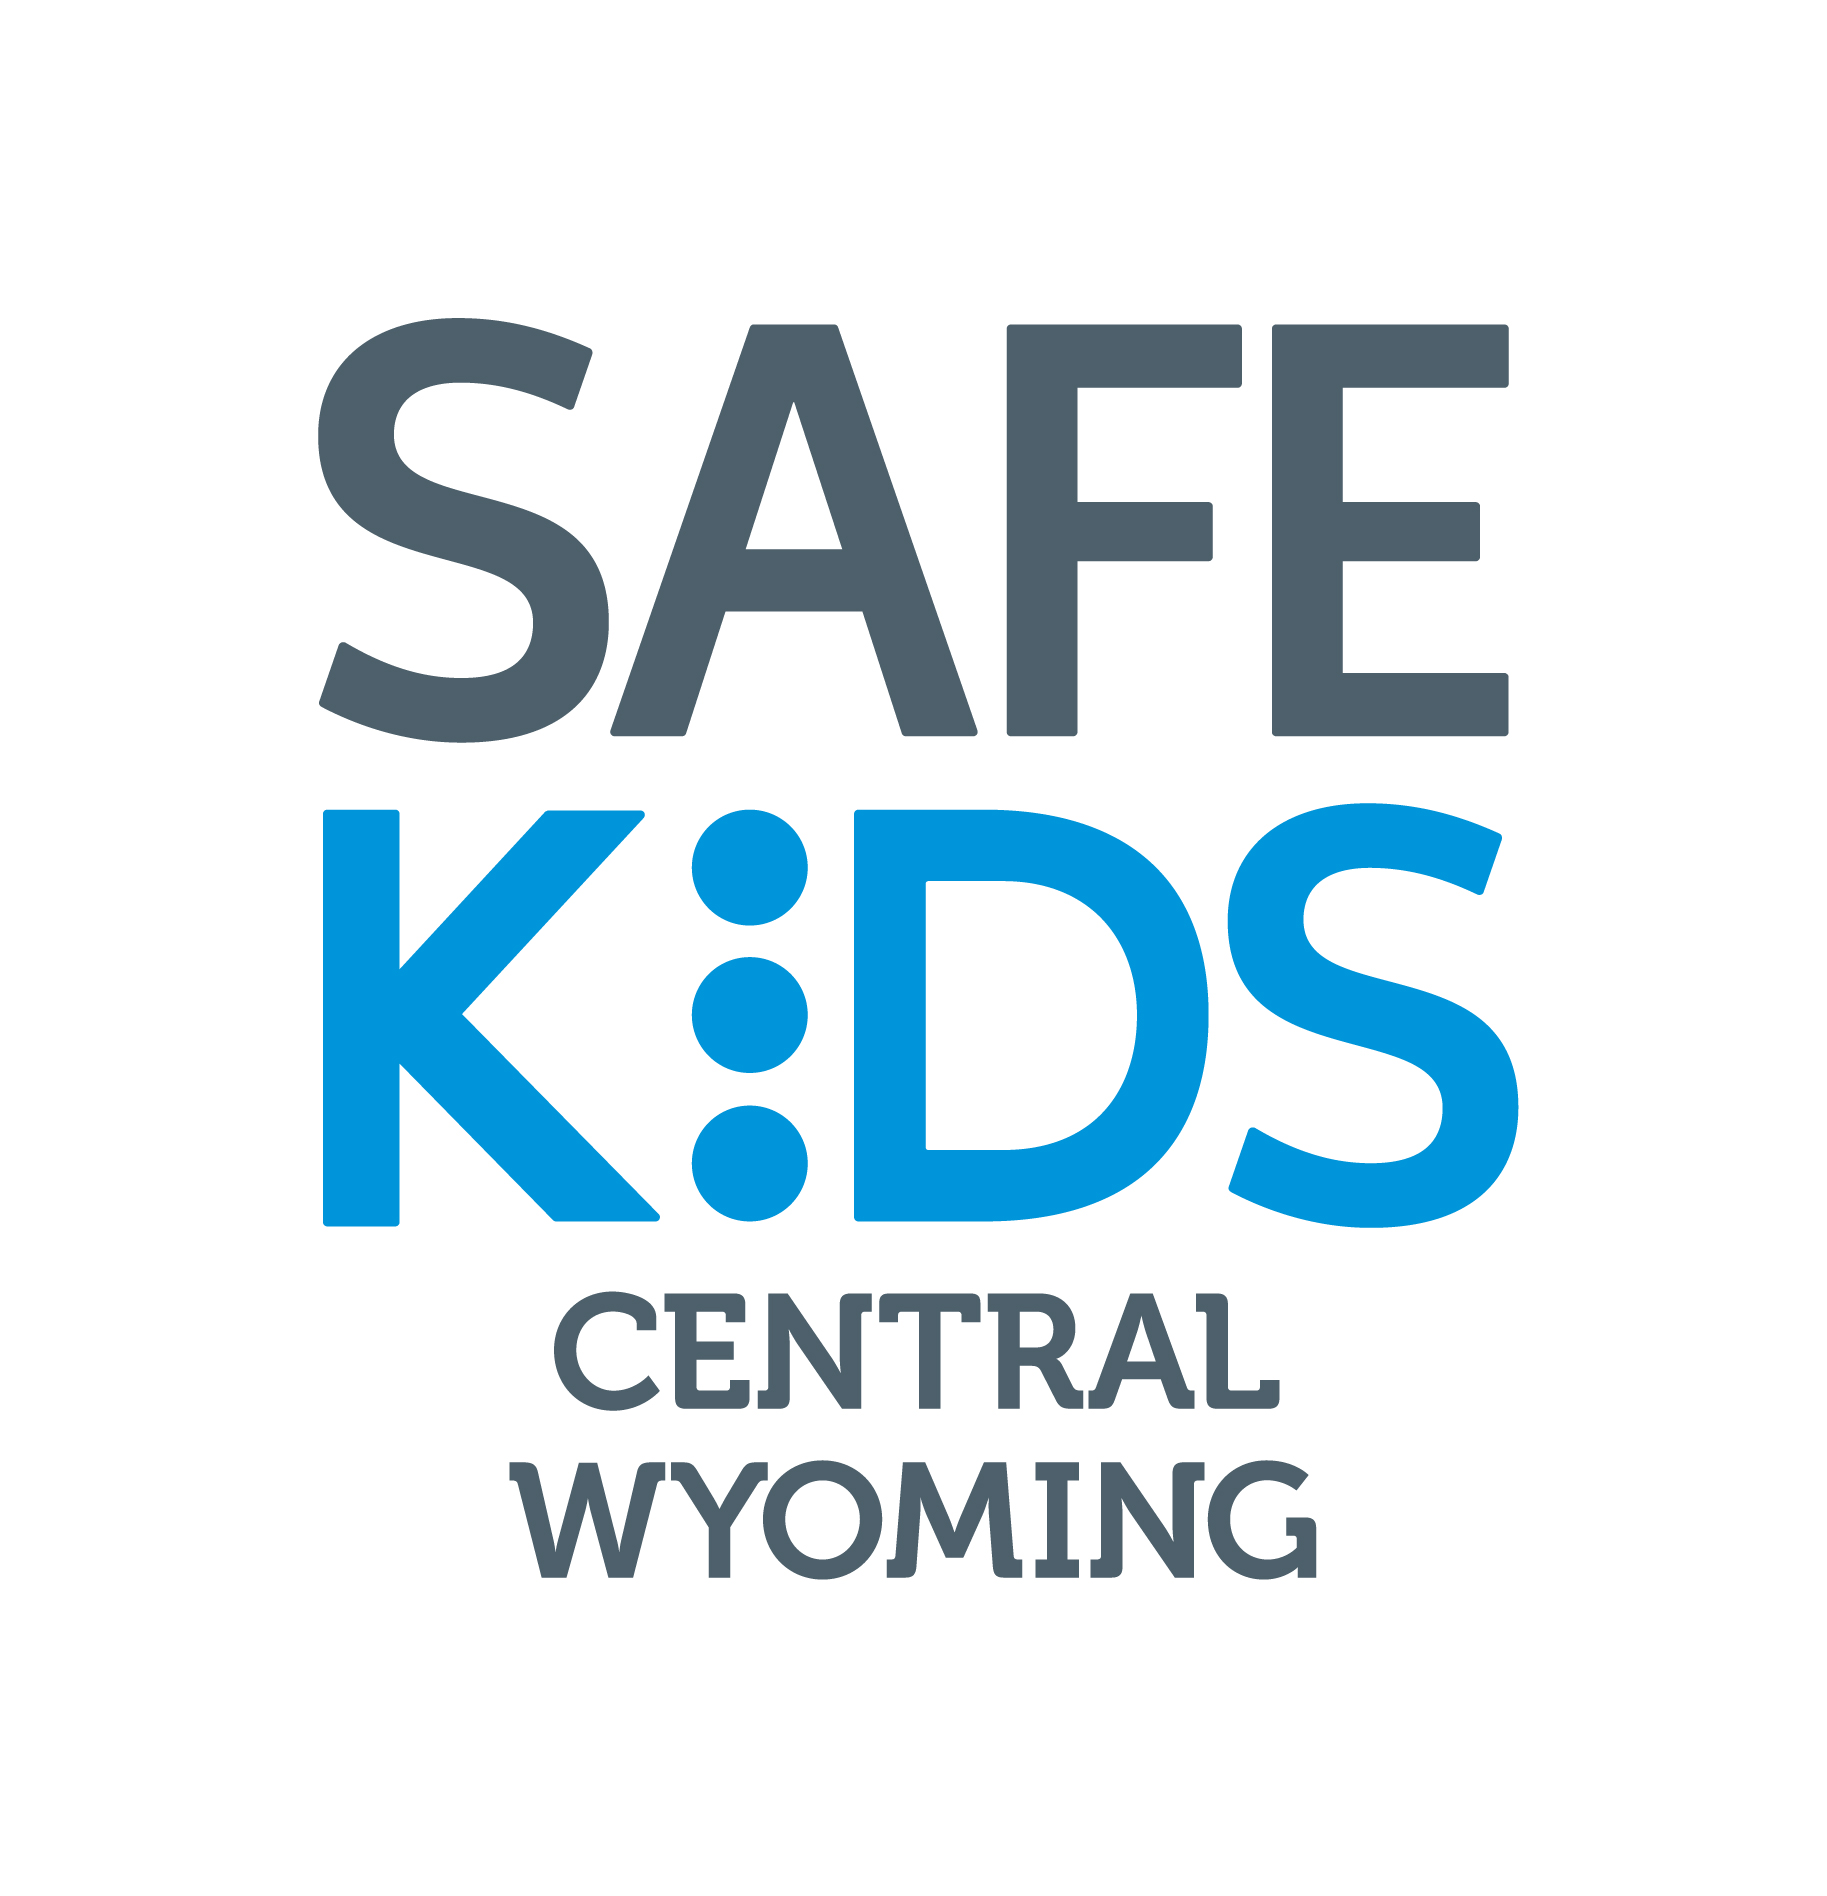 Safe Kids of Central Wyoming1233 E. 2nd St. Casper, WY 82601 307-577-7904http://wyomingmedicalcenter.org/department/injury-prevention